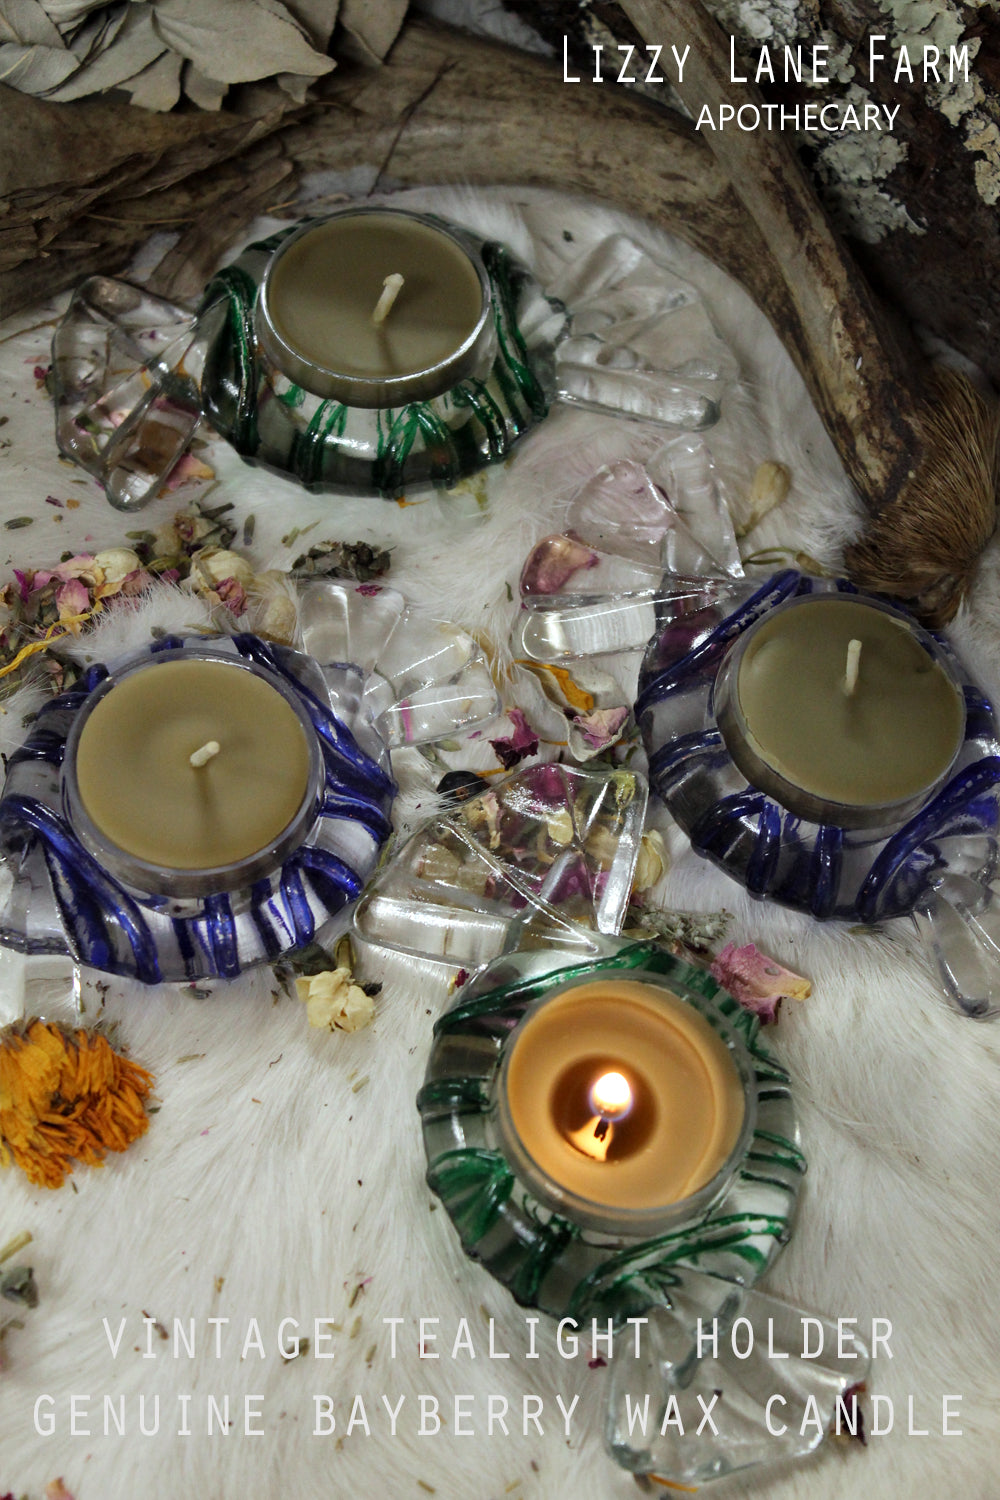 Vintage Candy Mint Shaped Tealight Holder with set of 2 Genuine Bayberry wax candles | Gift Box|